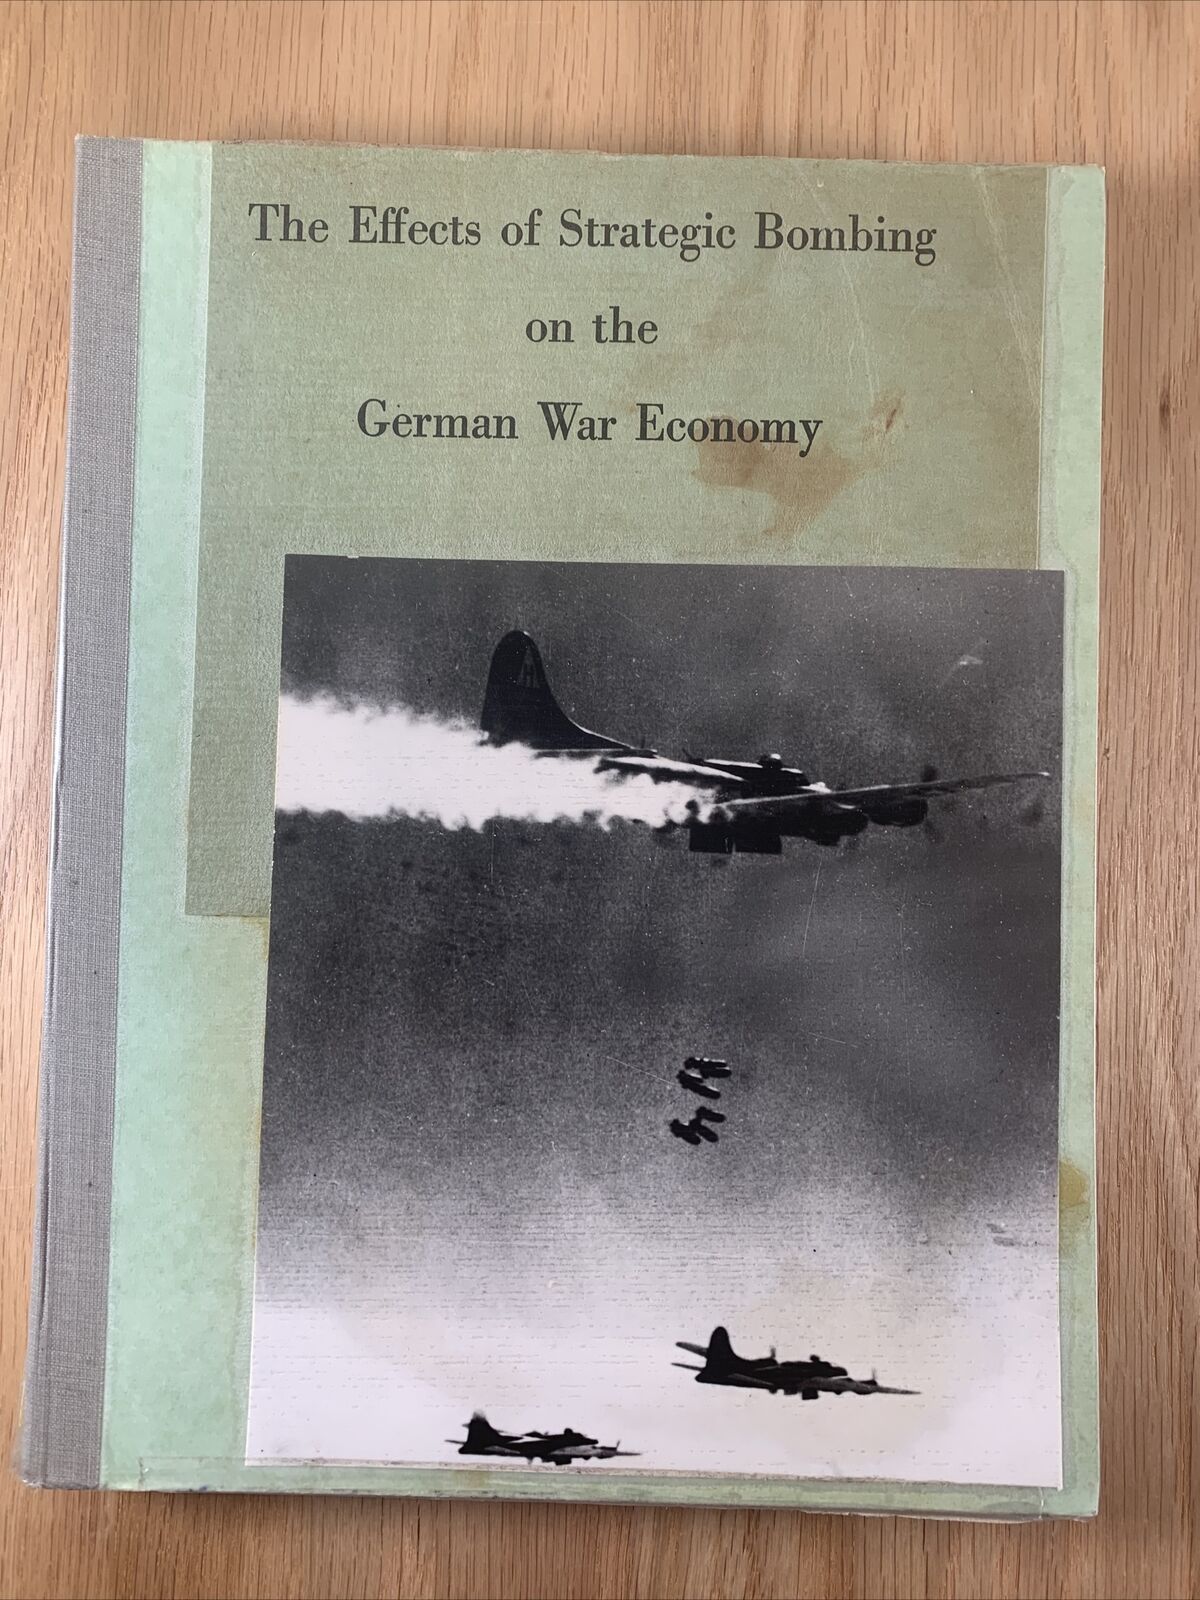 Effects of Strategic Bombing on the German War Economy - WWII - October 31, 1945